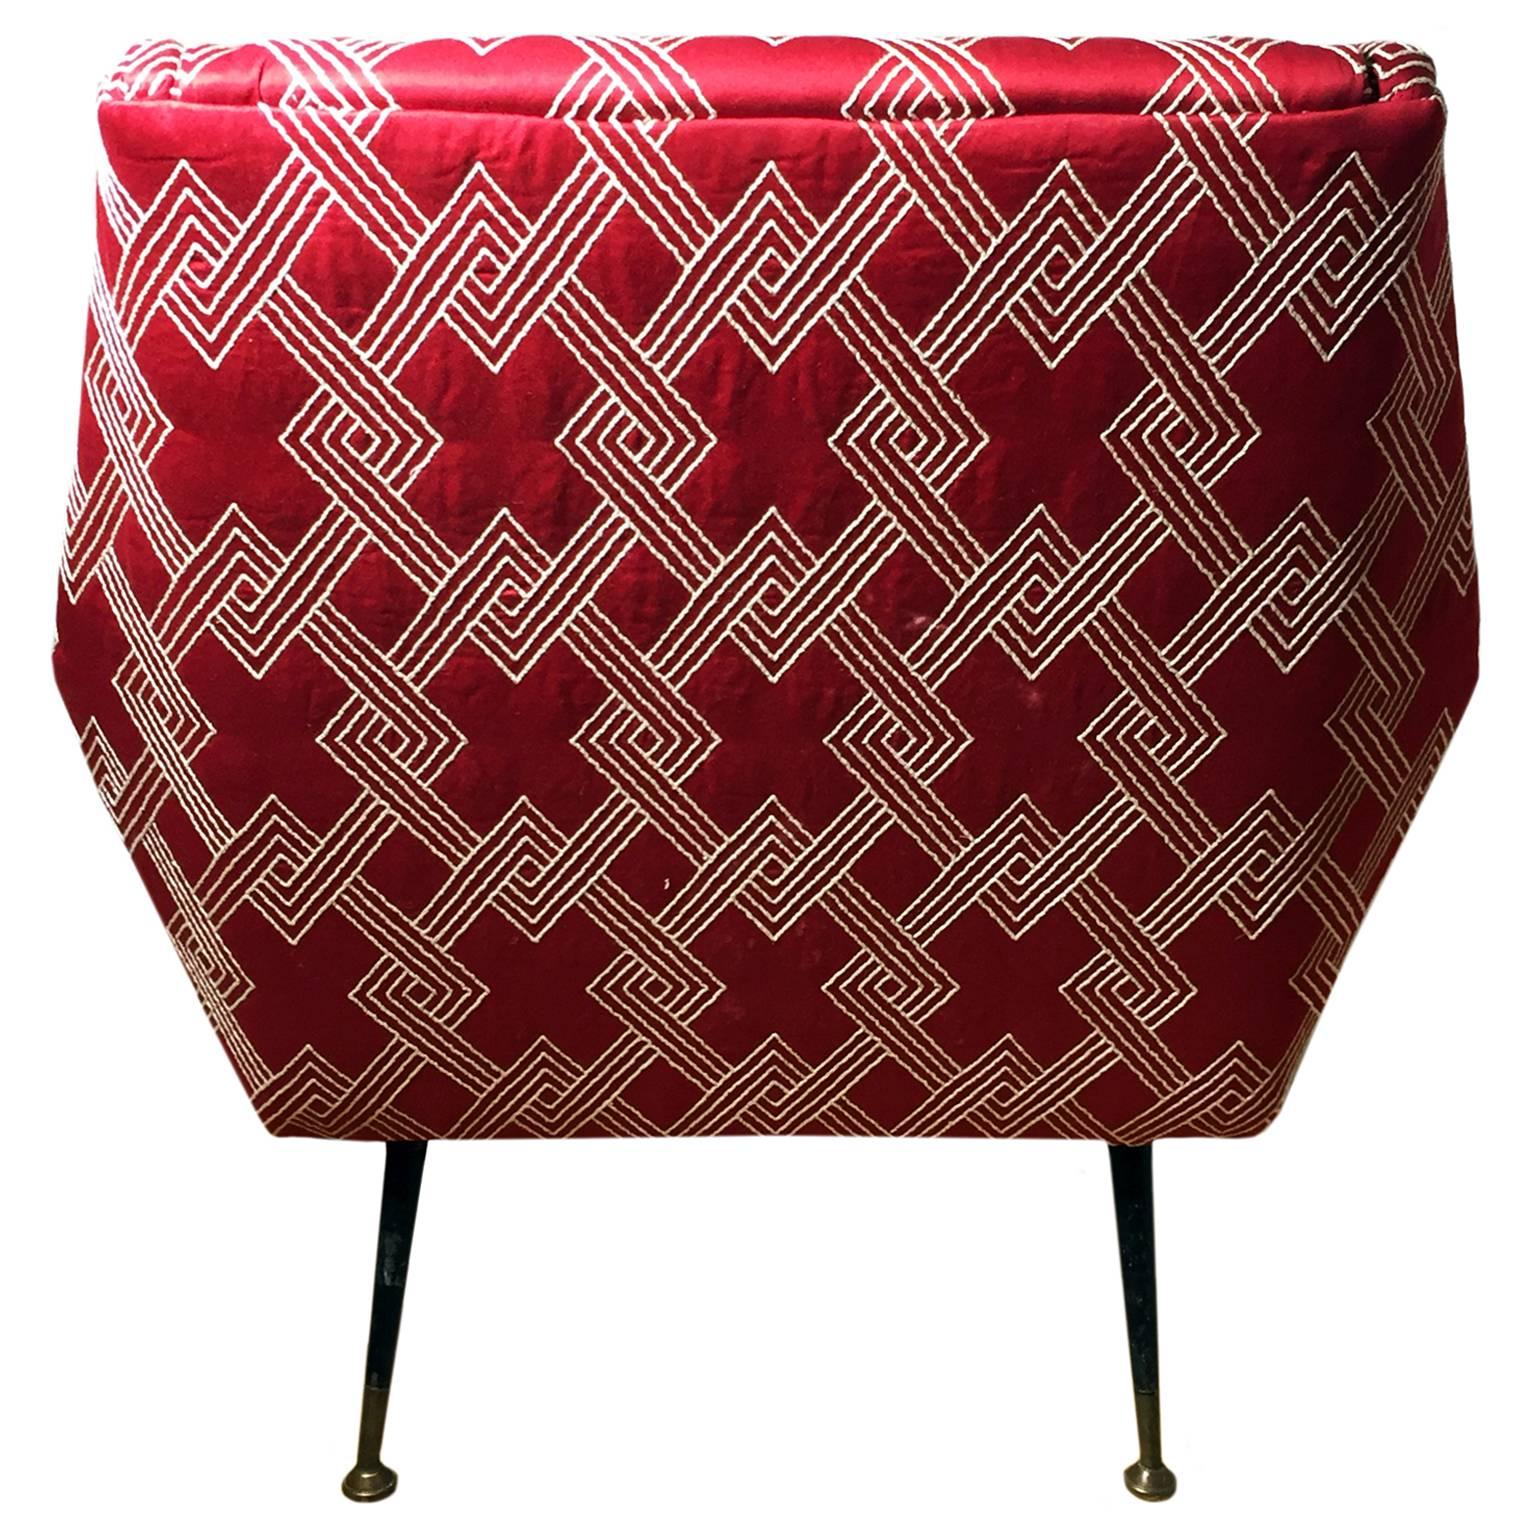 Mid-20th Century Mid-Century Italian Angled Back Club Chair in Red and White Geometric Fabric